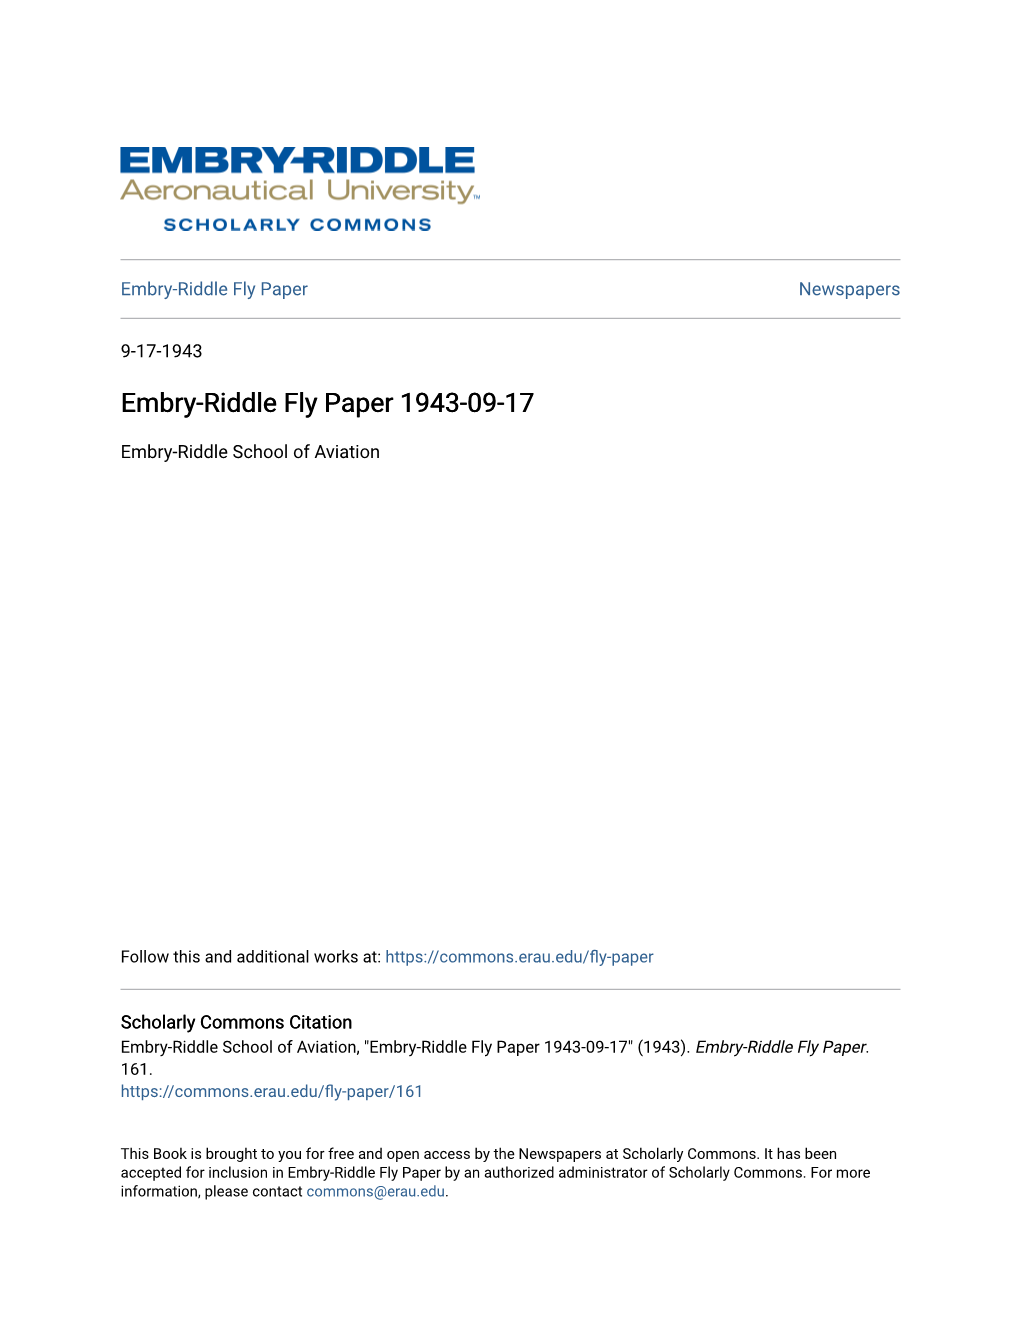 Embry-Riddle Fly Paper 1943-09-17